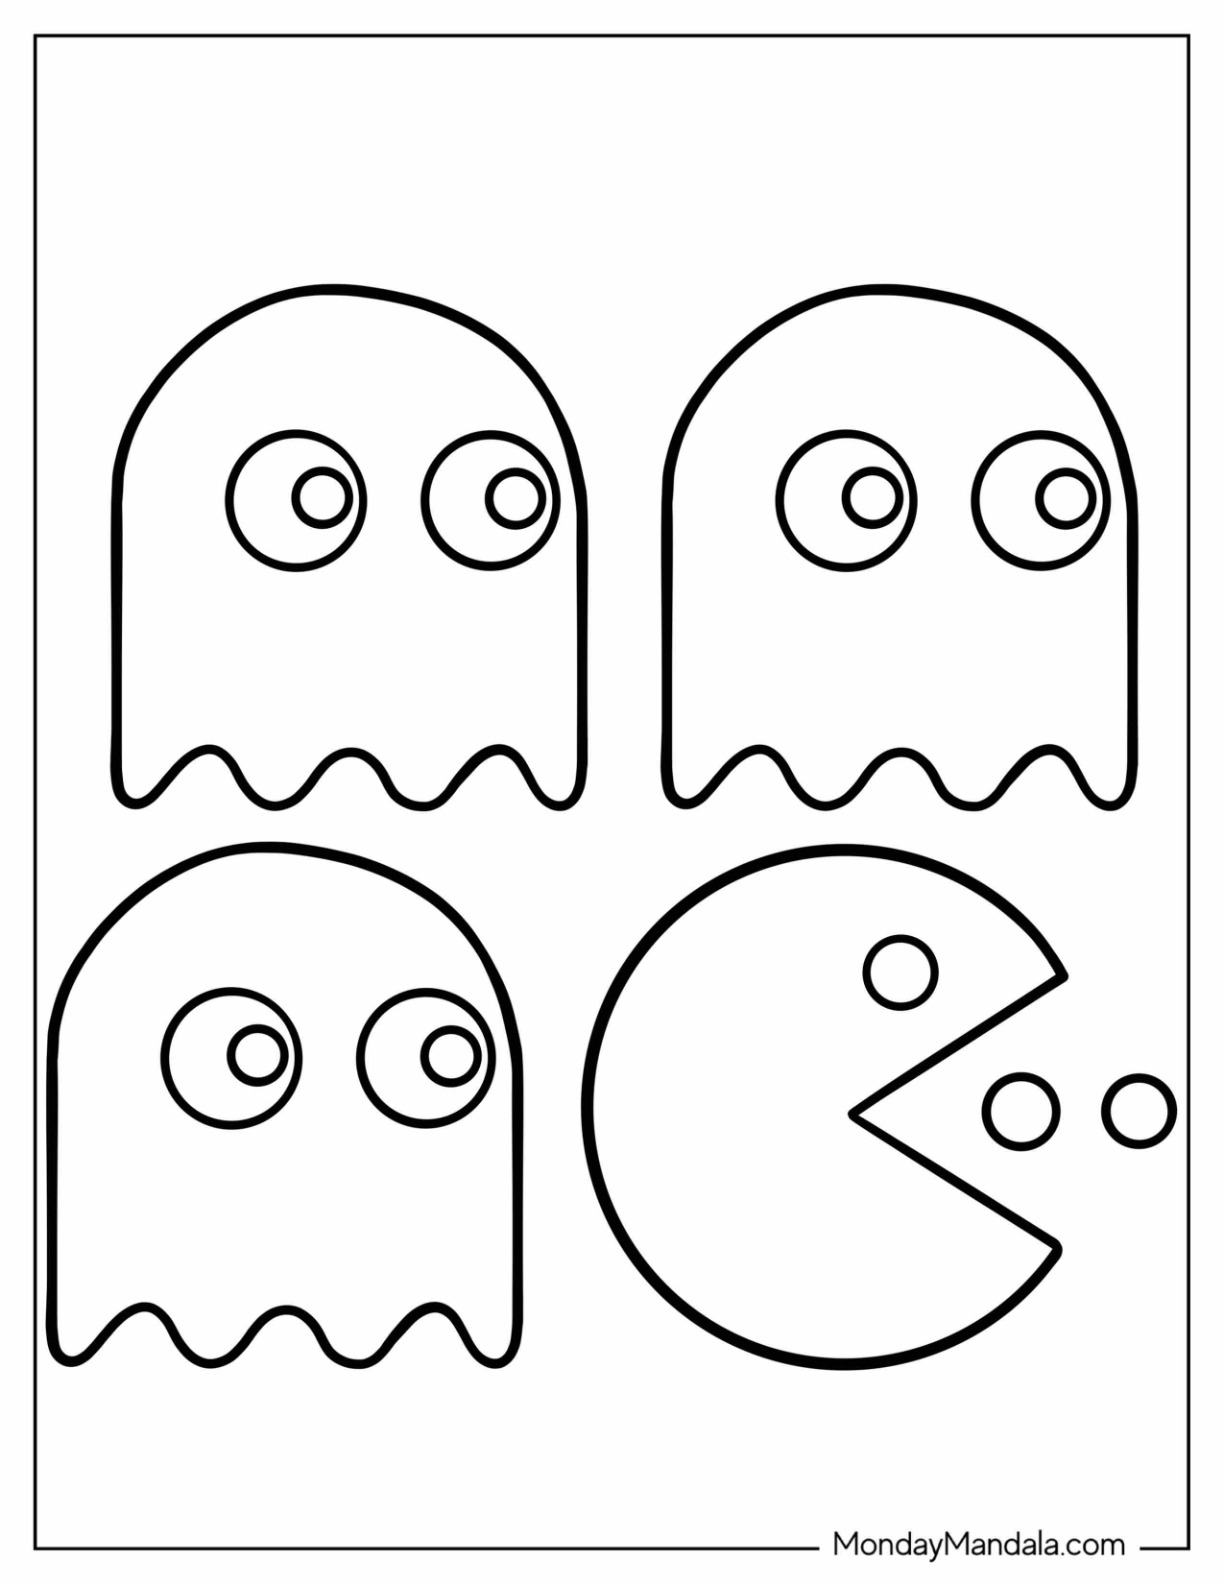 20 Pac Man Coloring Pages Free PDF Printables 